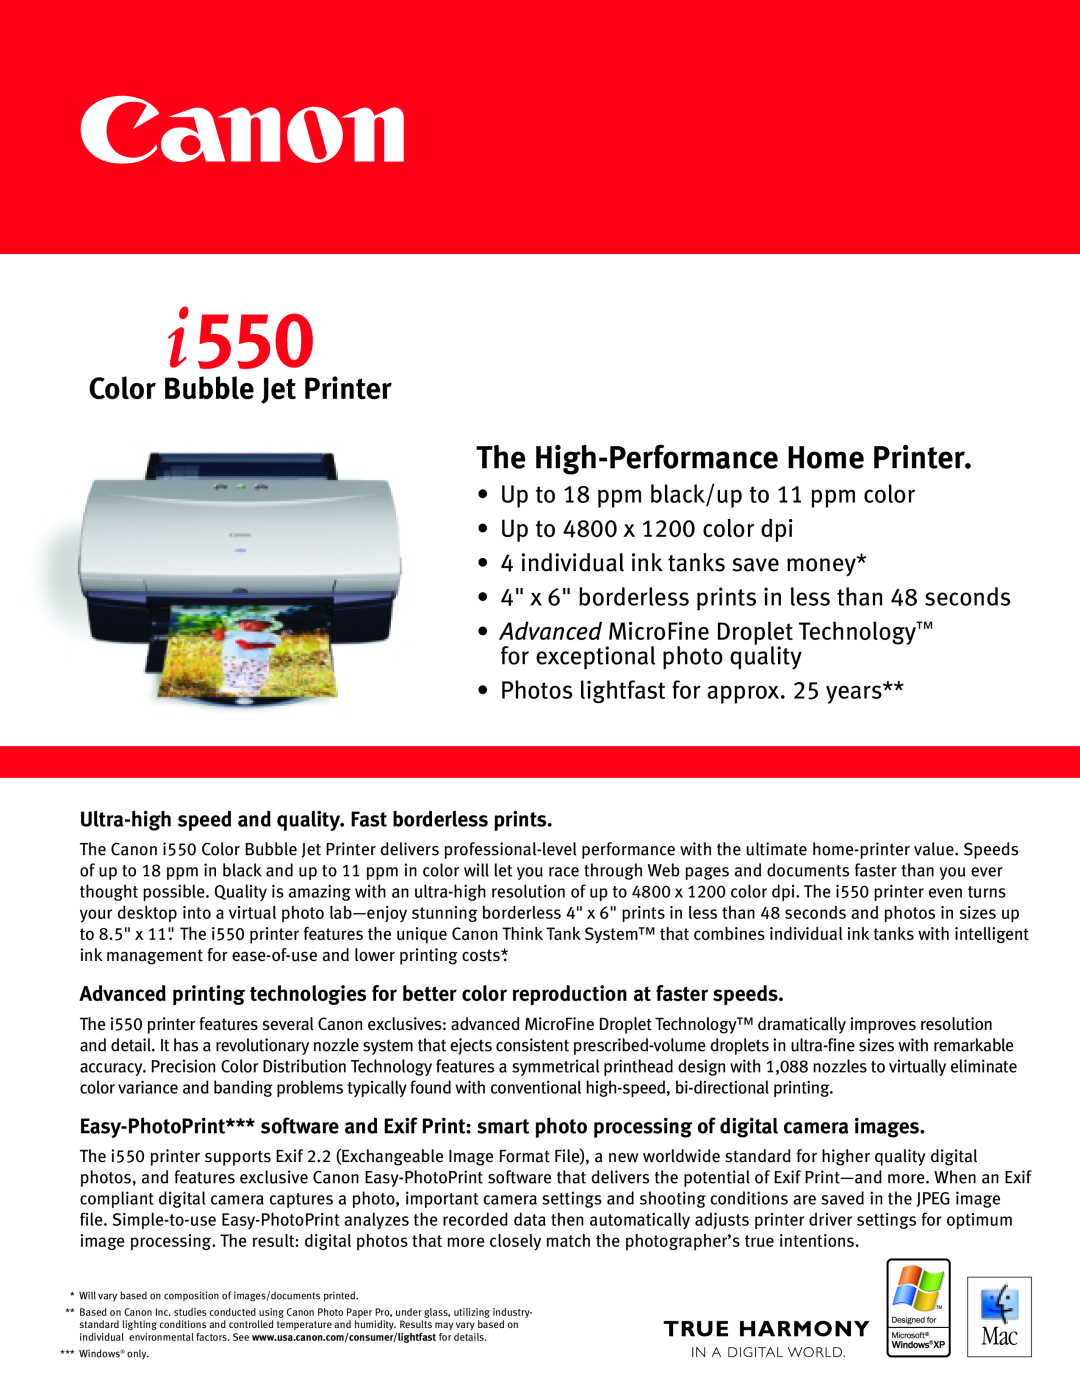 Canon 550 manual The High-Performance Home Printer, Color Bubble Jet Printer, individual ink tanks save money 